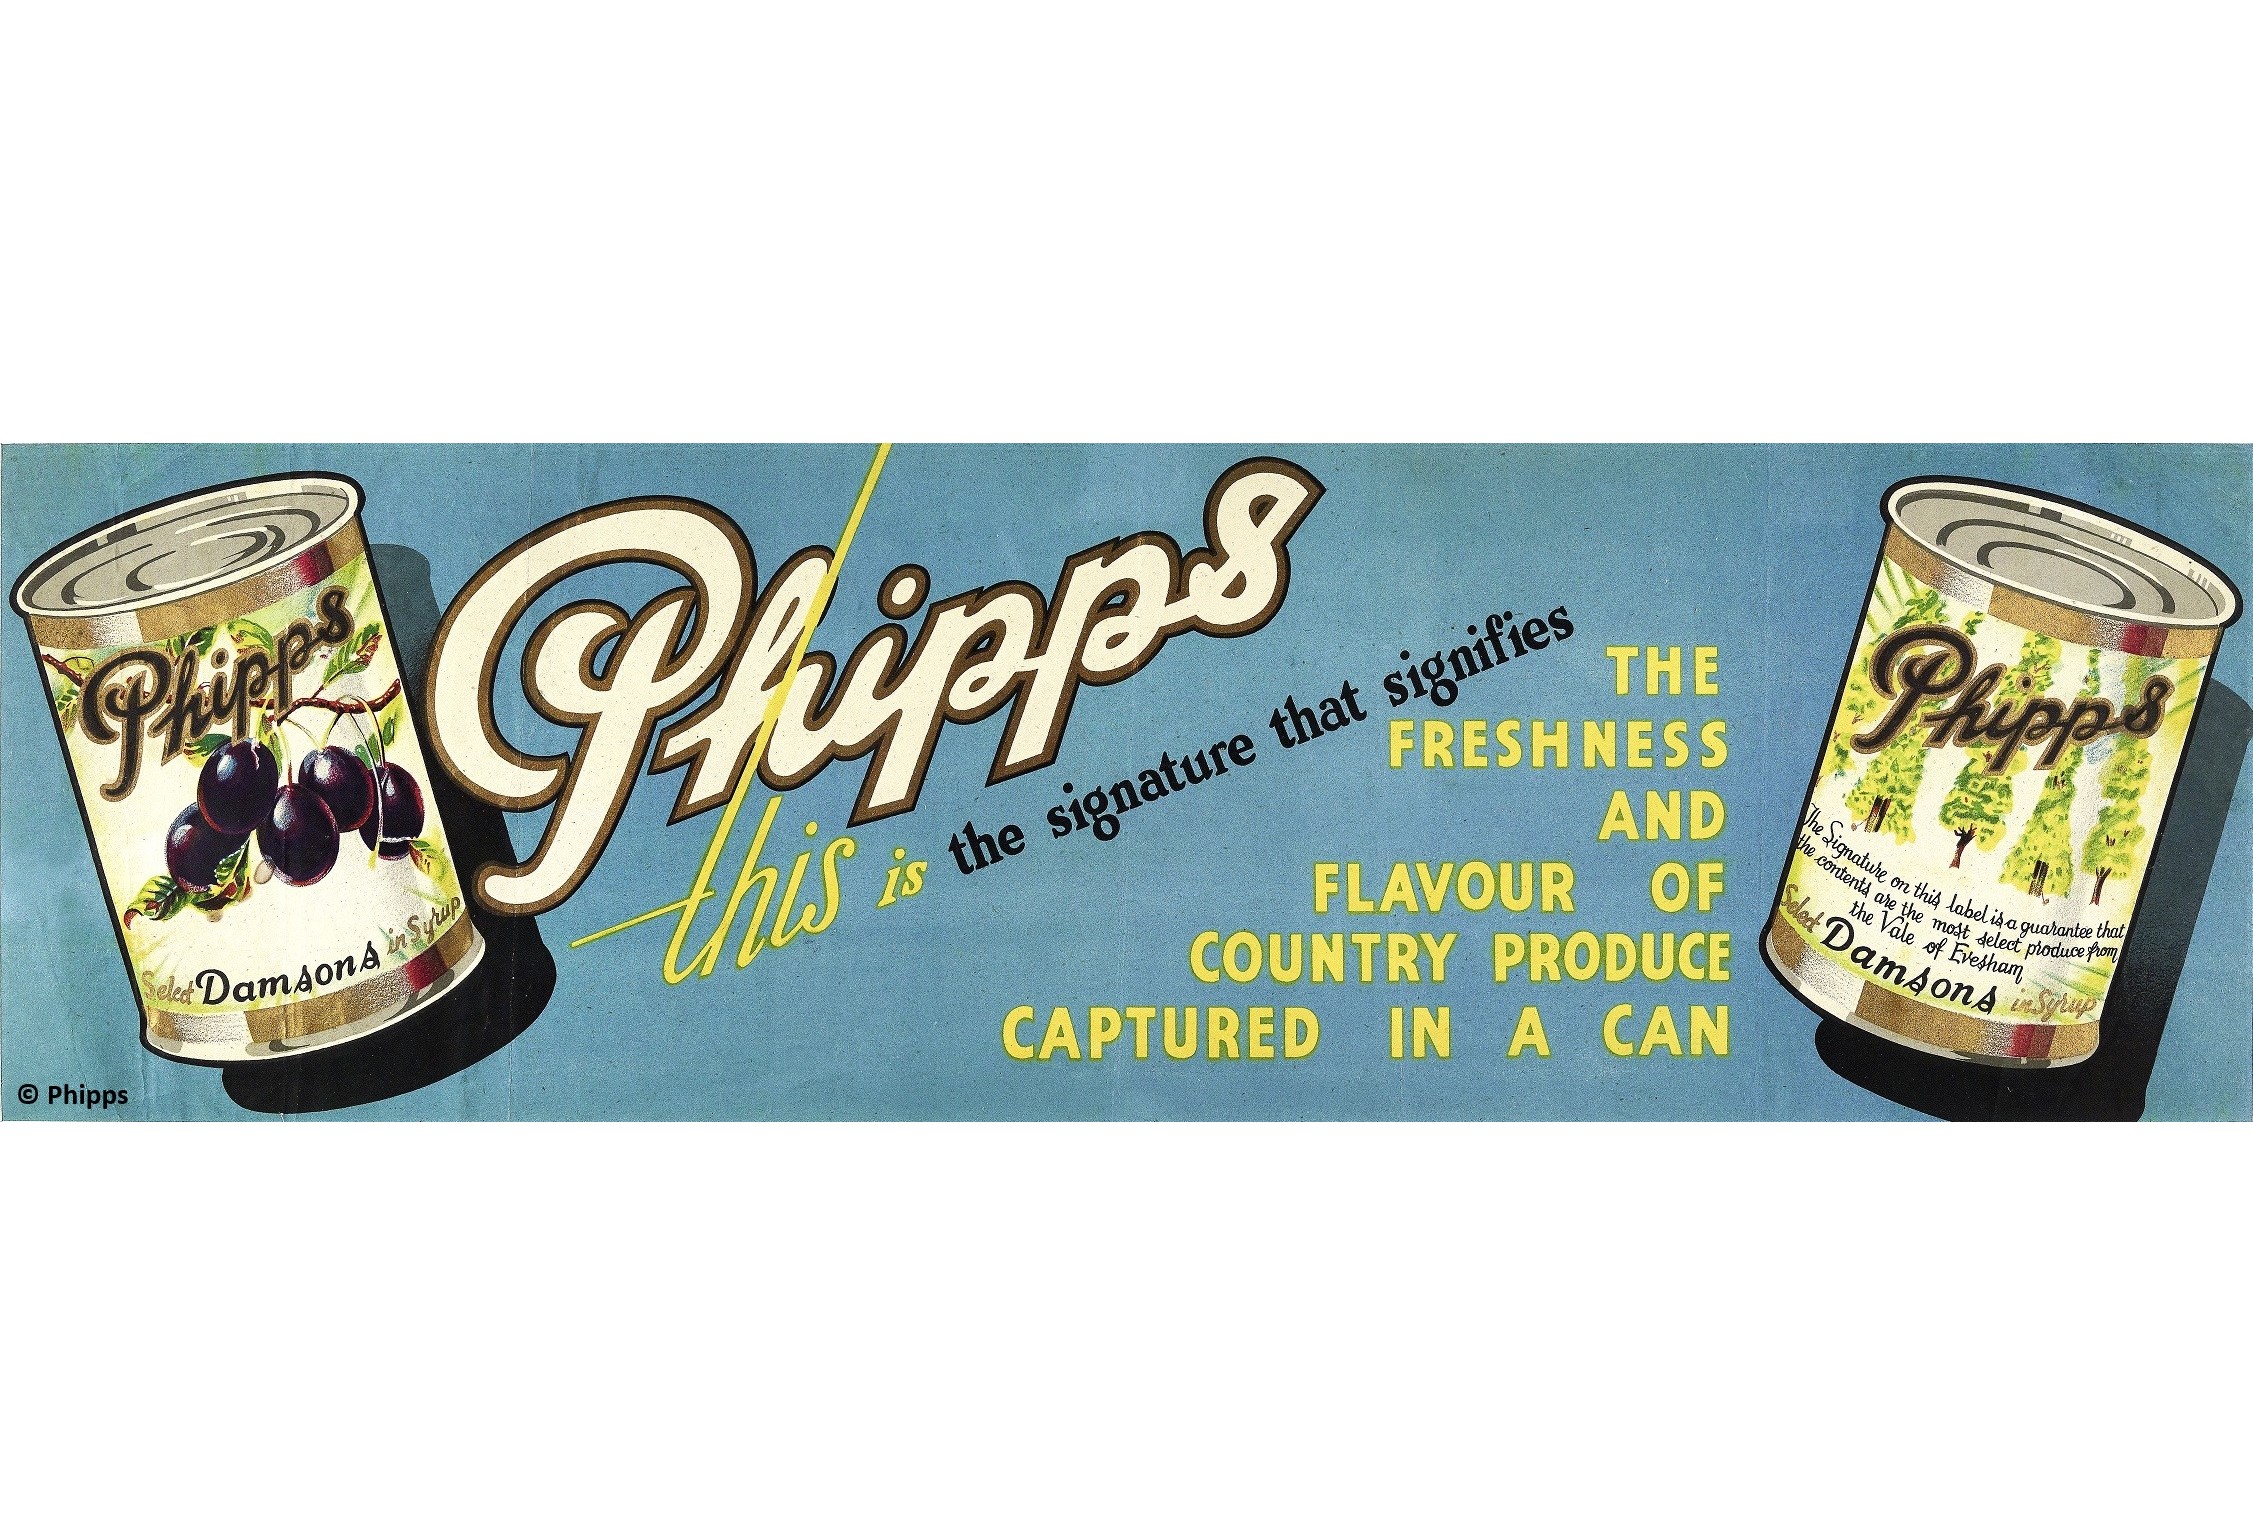 Phipp's cans advert